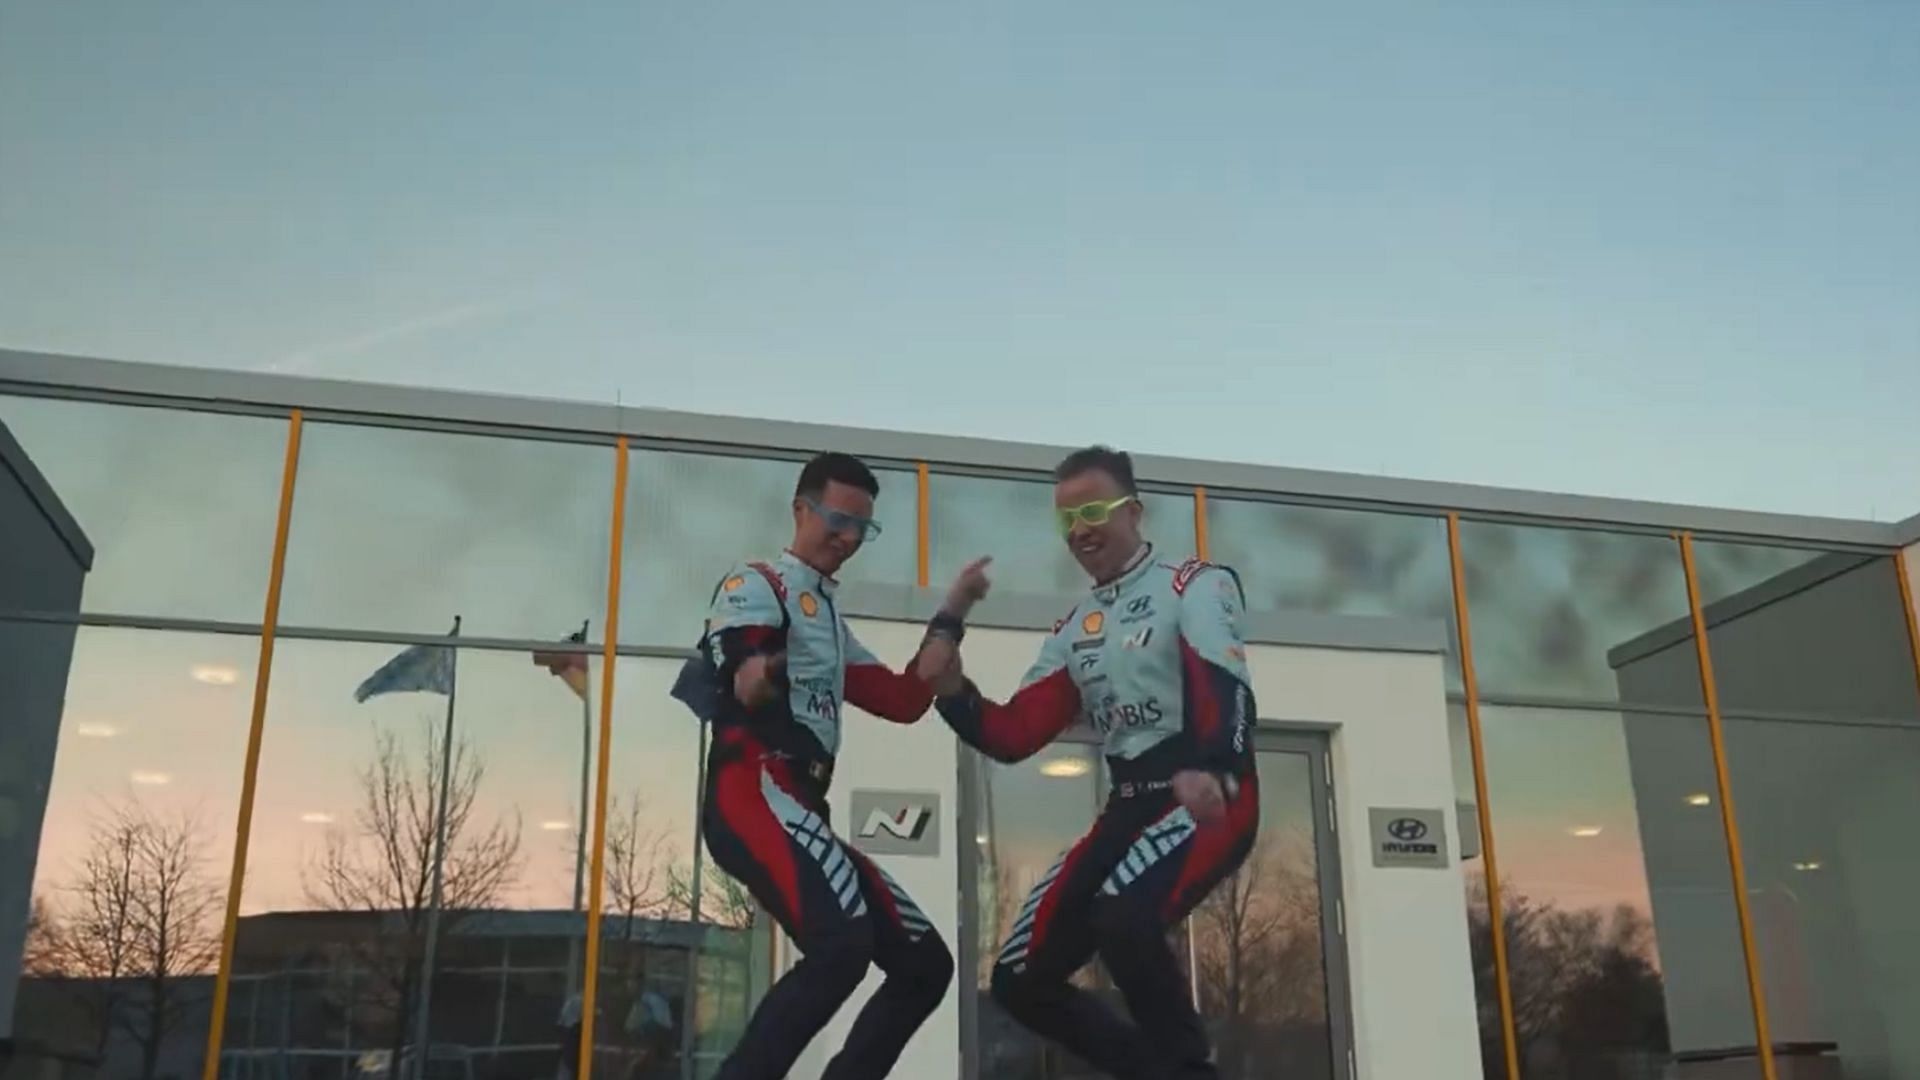 Two girls dancing on top of a car scene recreated in Hyundai Motorsport&rsquo;s video (Image via X/@HMSGOfficial)